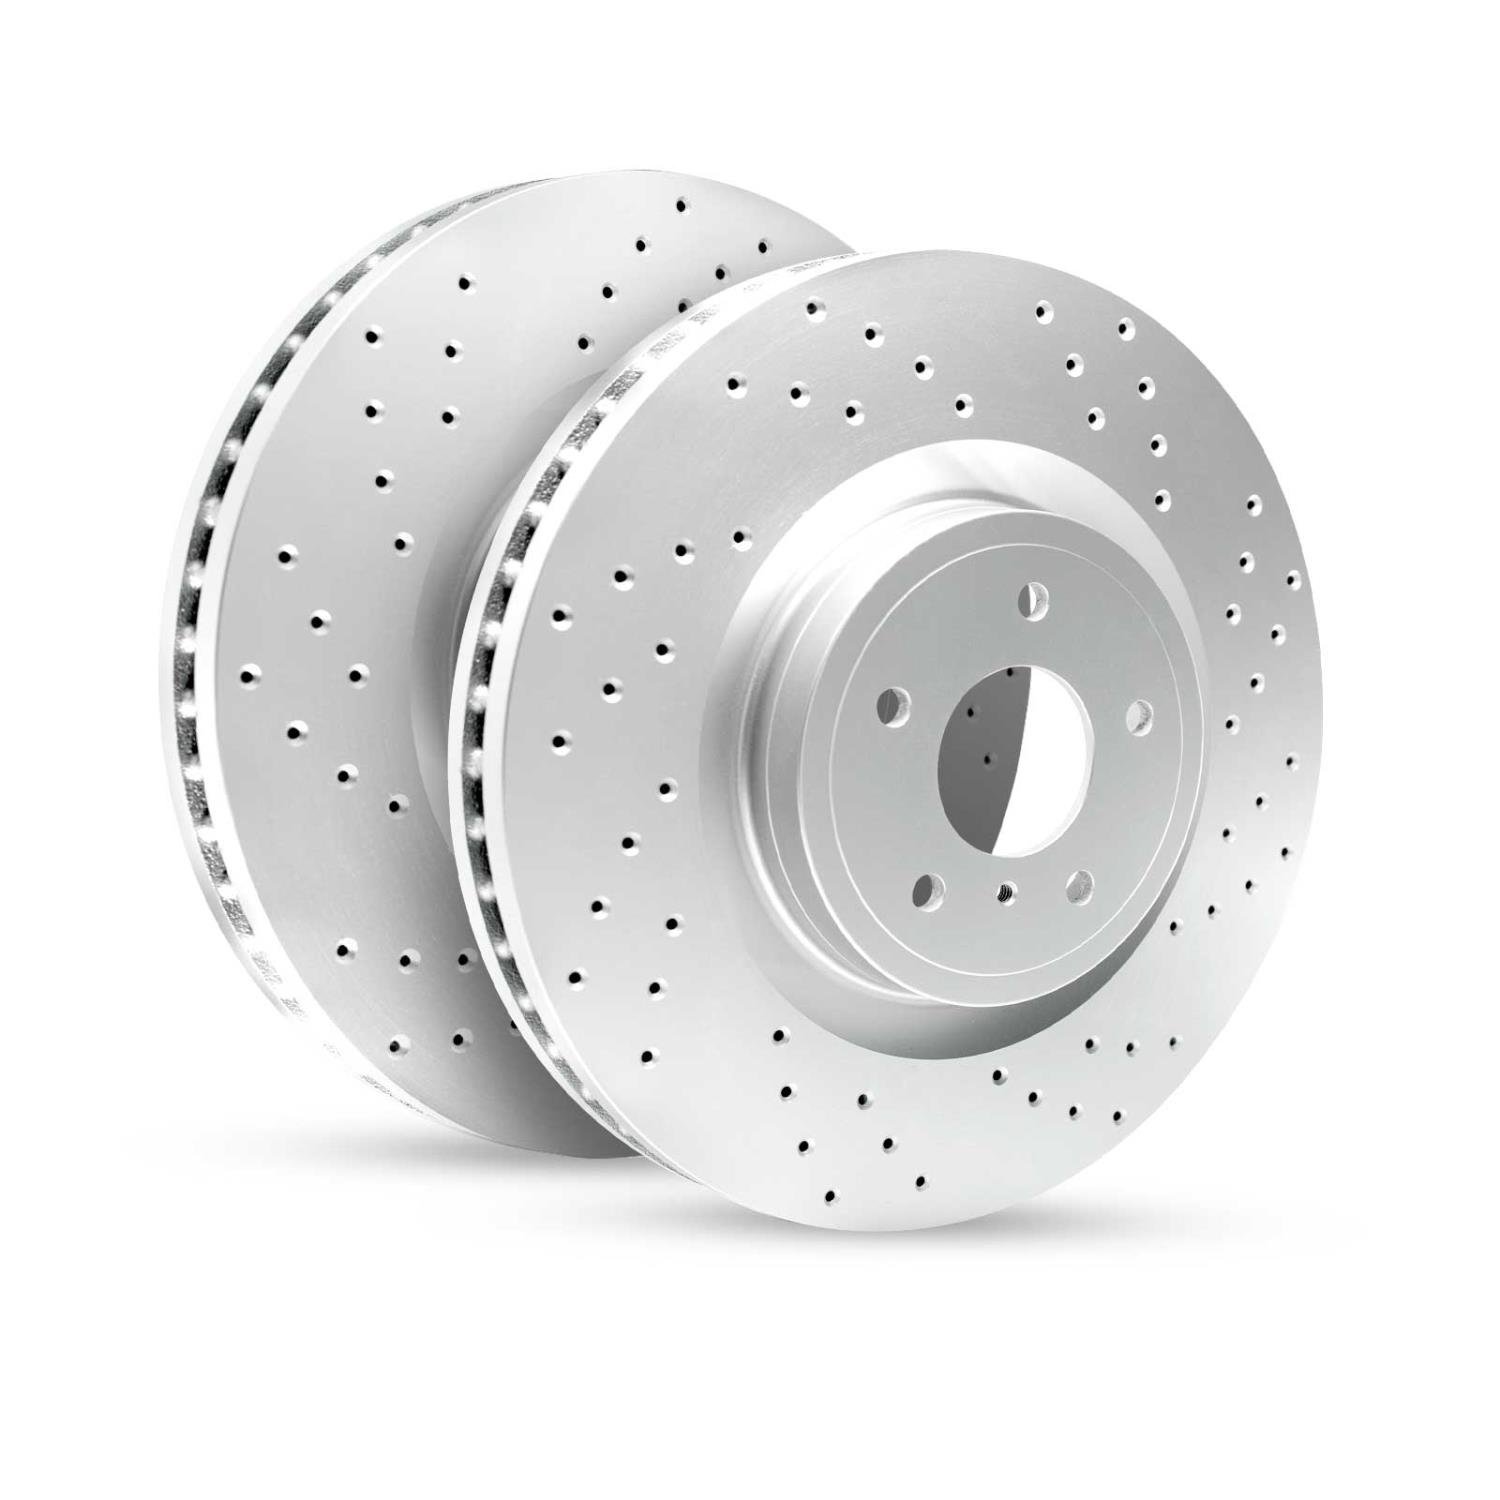 GEO-Carbon Drilled & Slotted Brake Rotor Set, Fits Select Lexus/Toyota/Scion, Position: Front